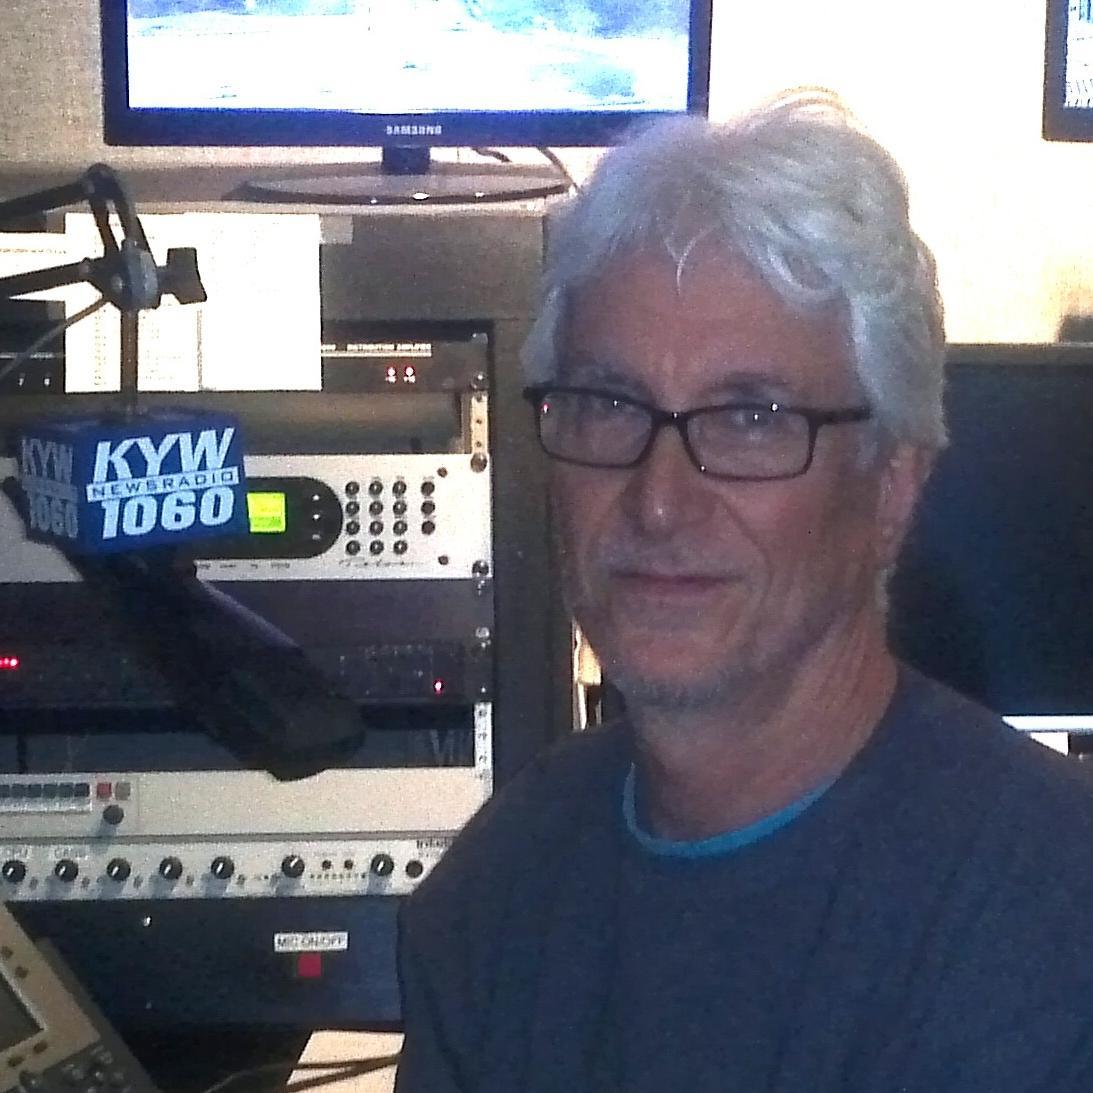 Traffic reporter on @kywnewsradio 1060 AM from 4:30A-10A LIVE from the KYW Traffic Center.